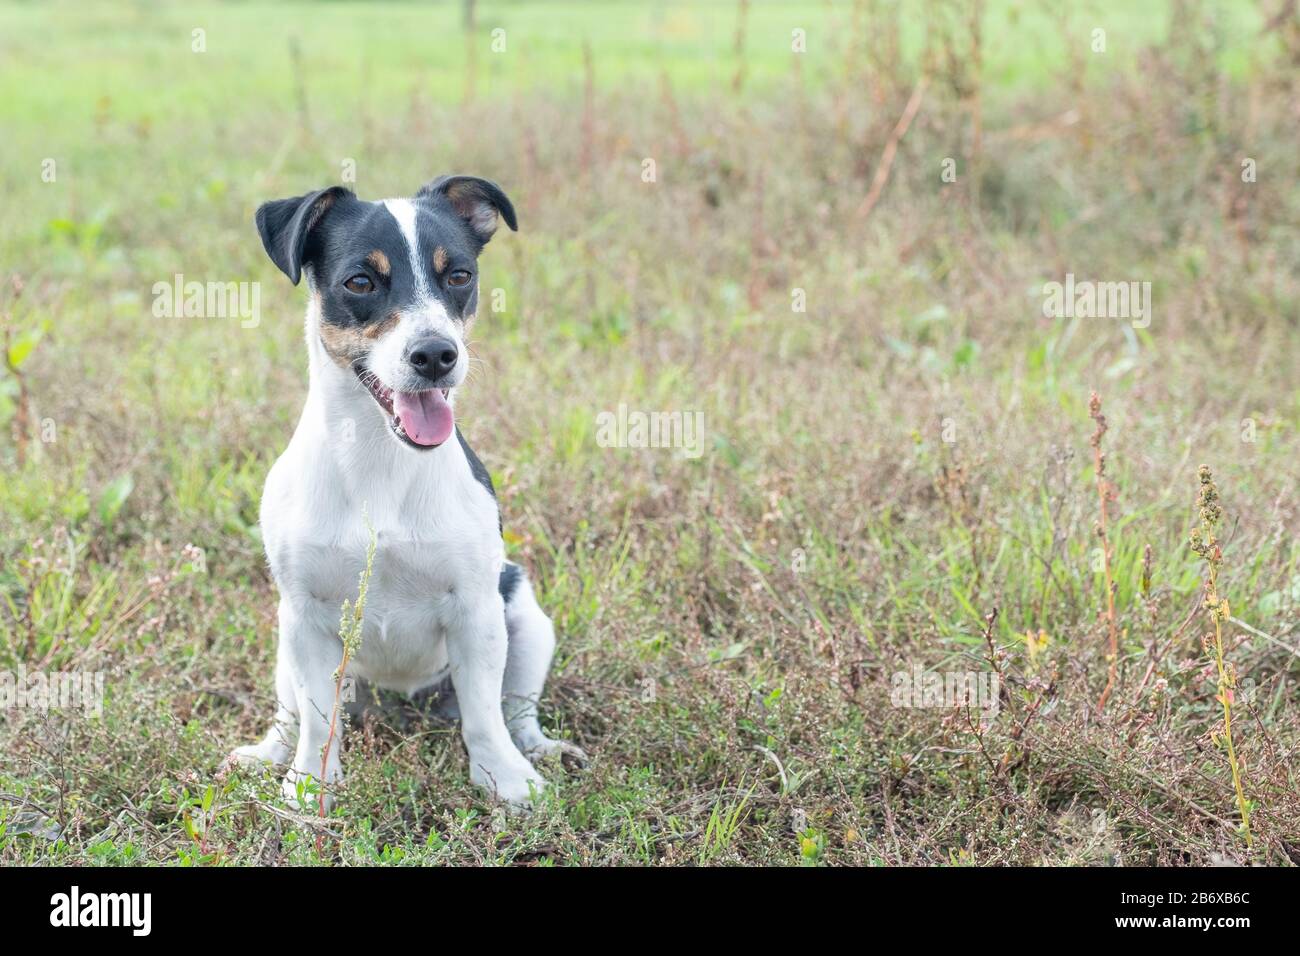 russell terrier black and white